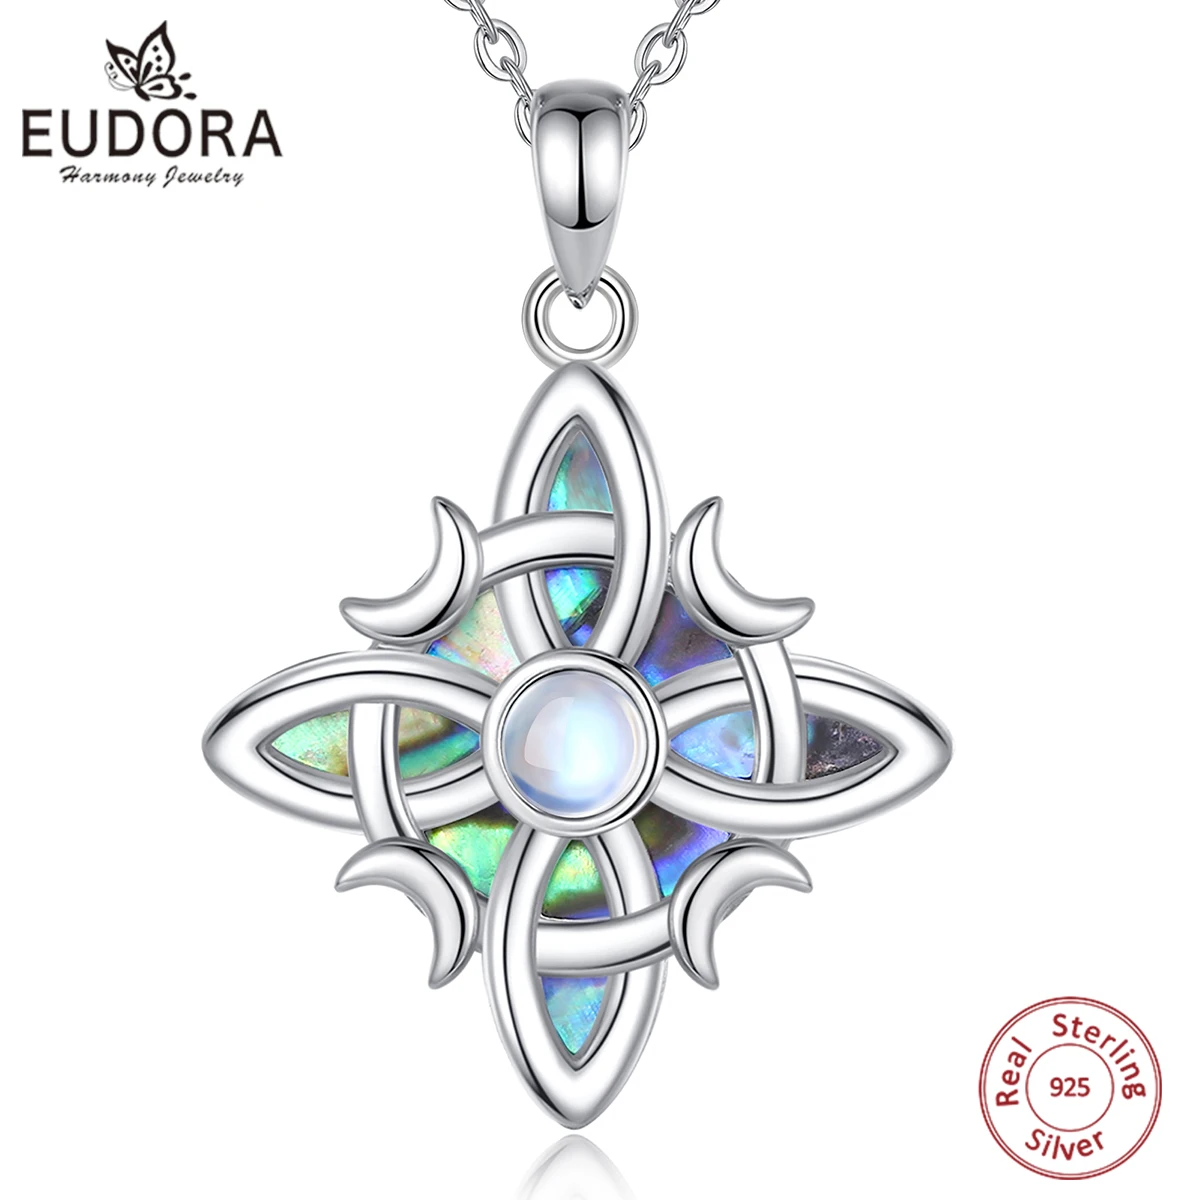 

Eudora 925 Sterling Silver Witch Celtic Knot Necklacefor Men Women Natural Abalone Witchcraft Amulet pendant Wicca Jewelry Gift